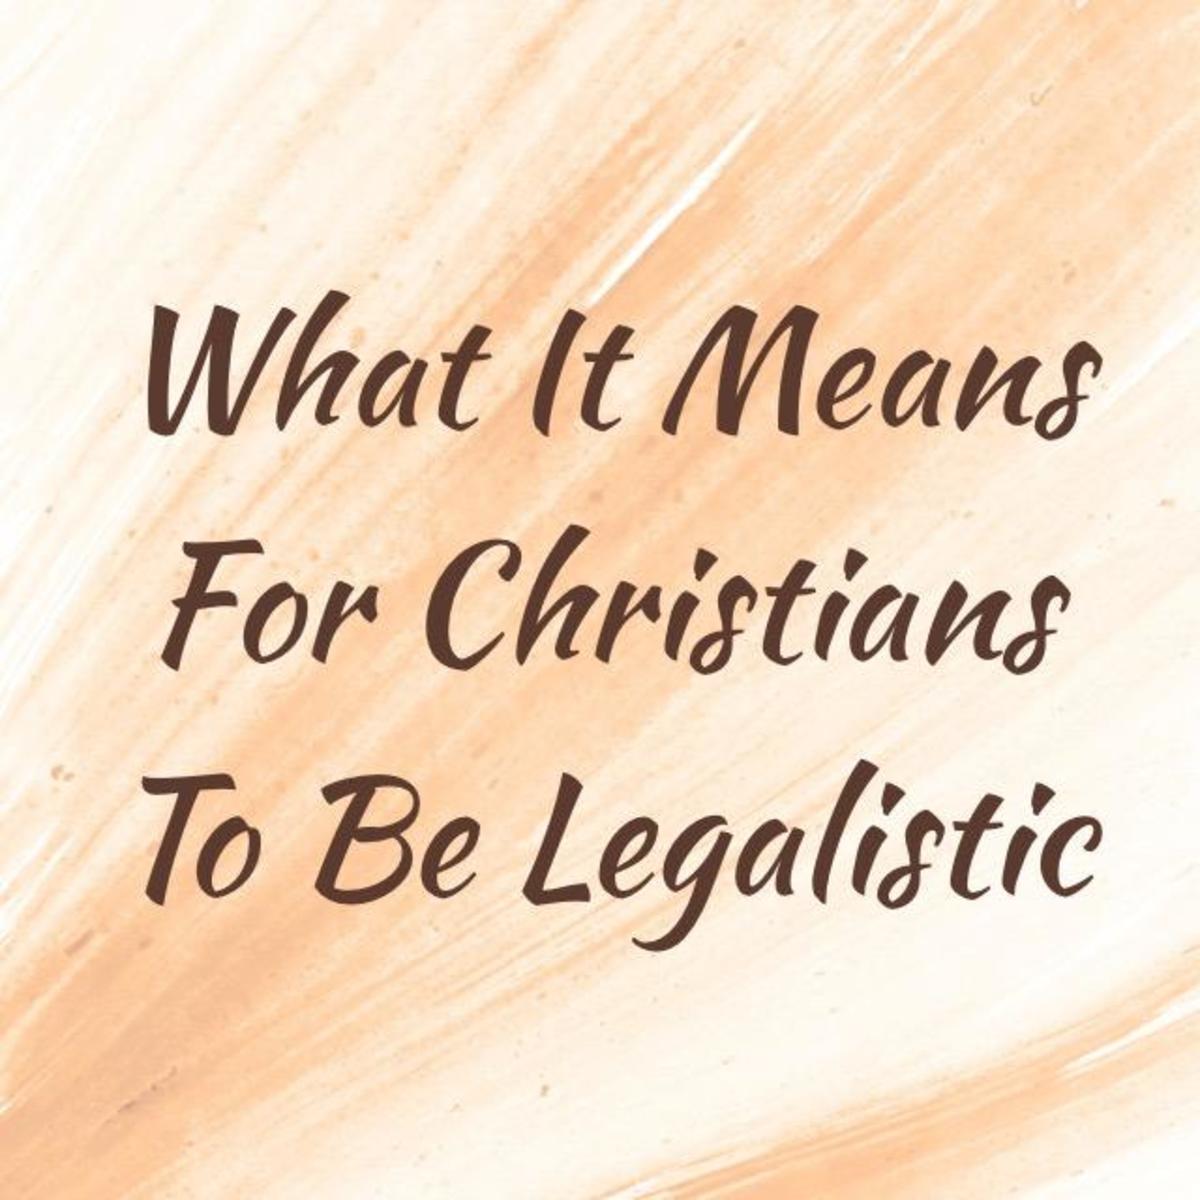 What It Means for Christians to Be Legalistic